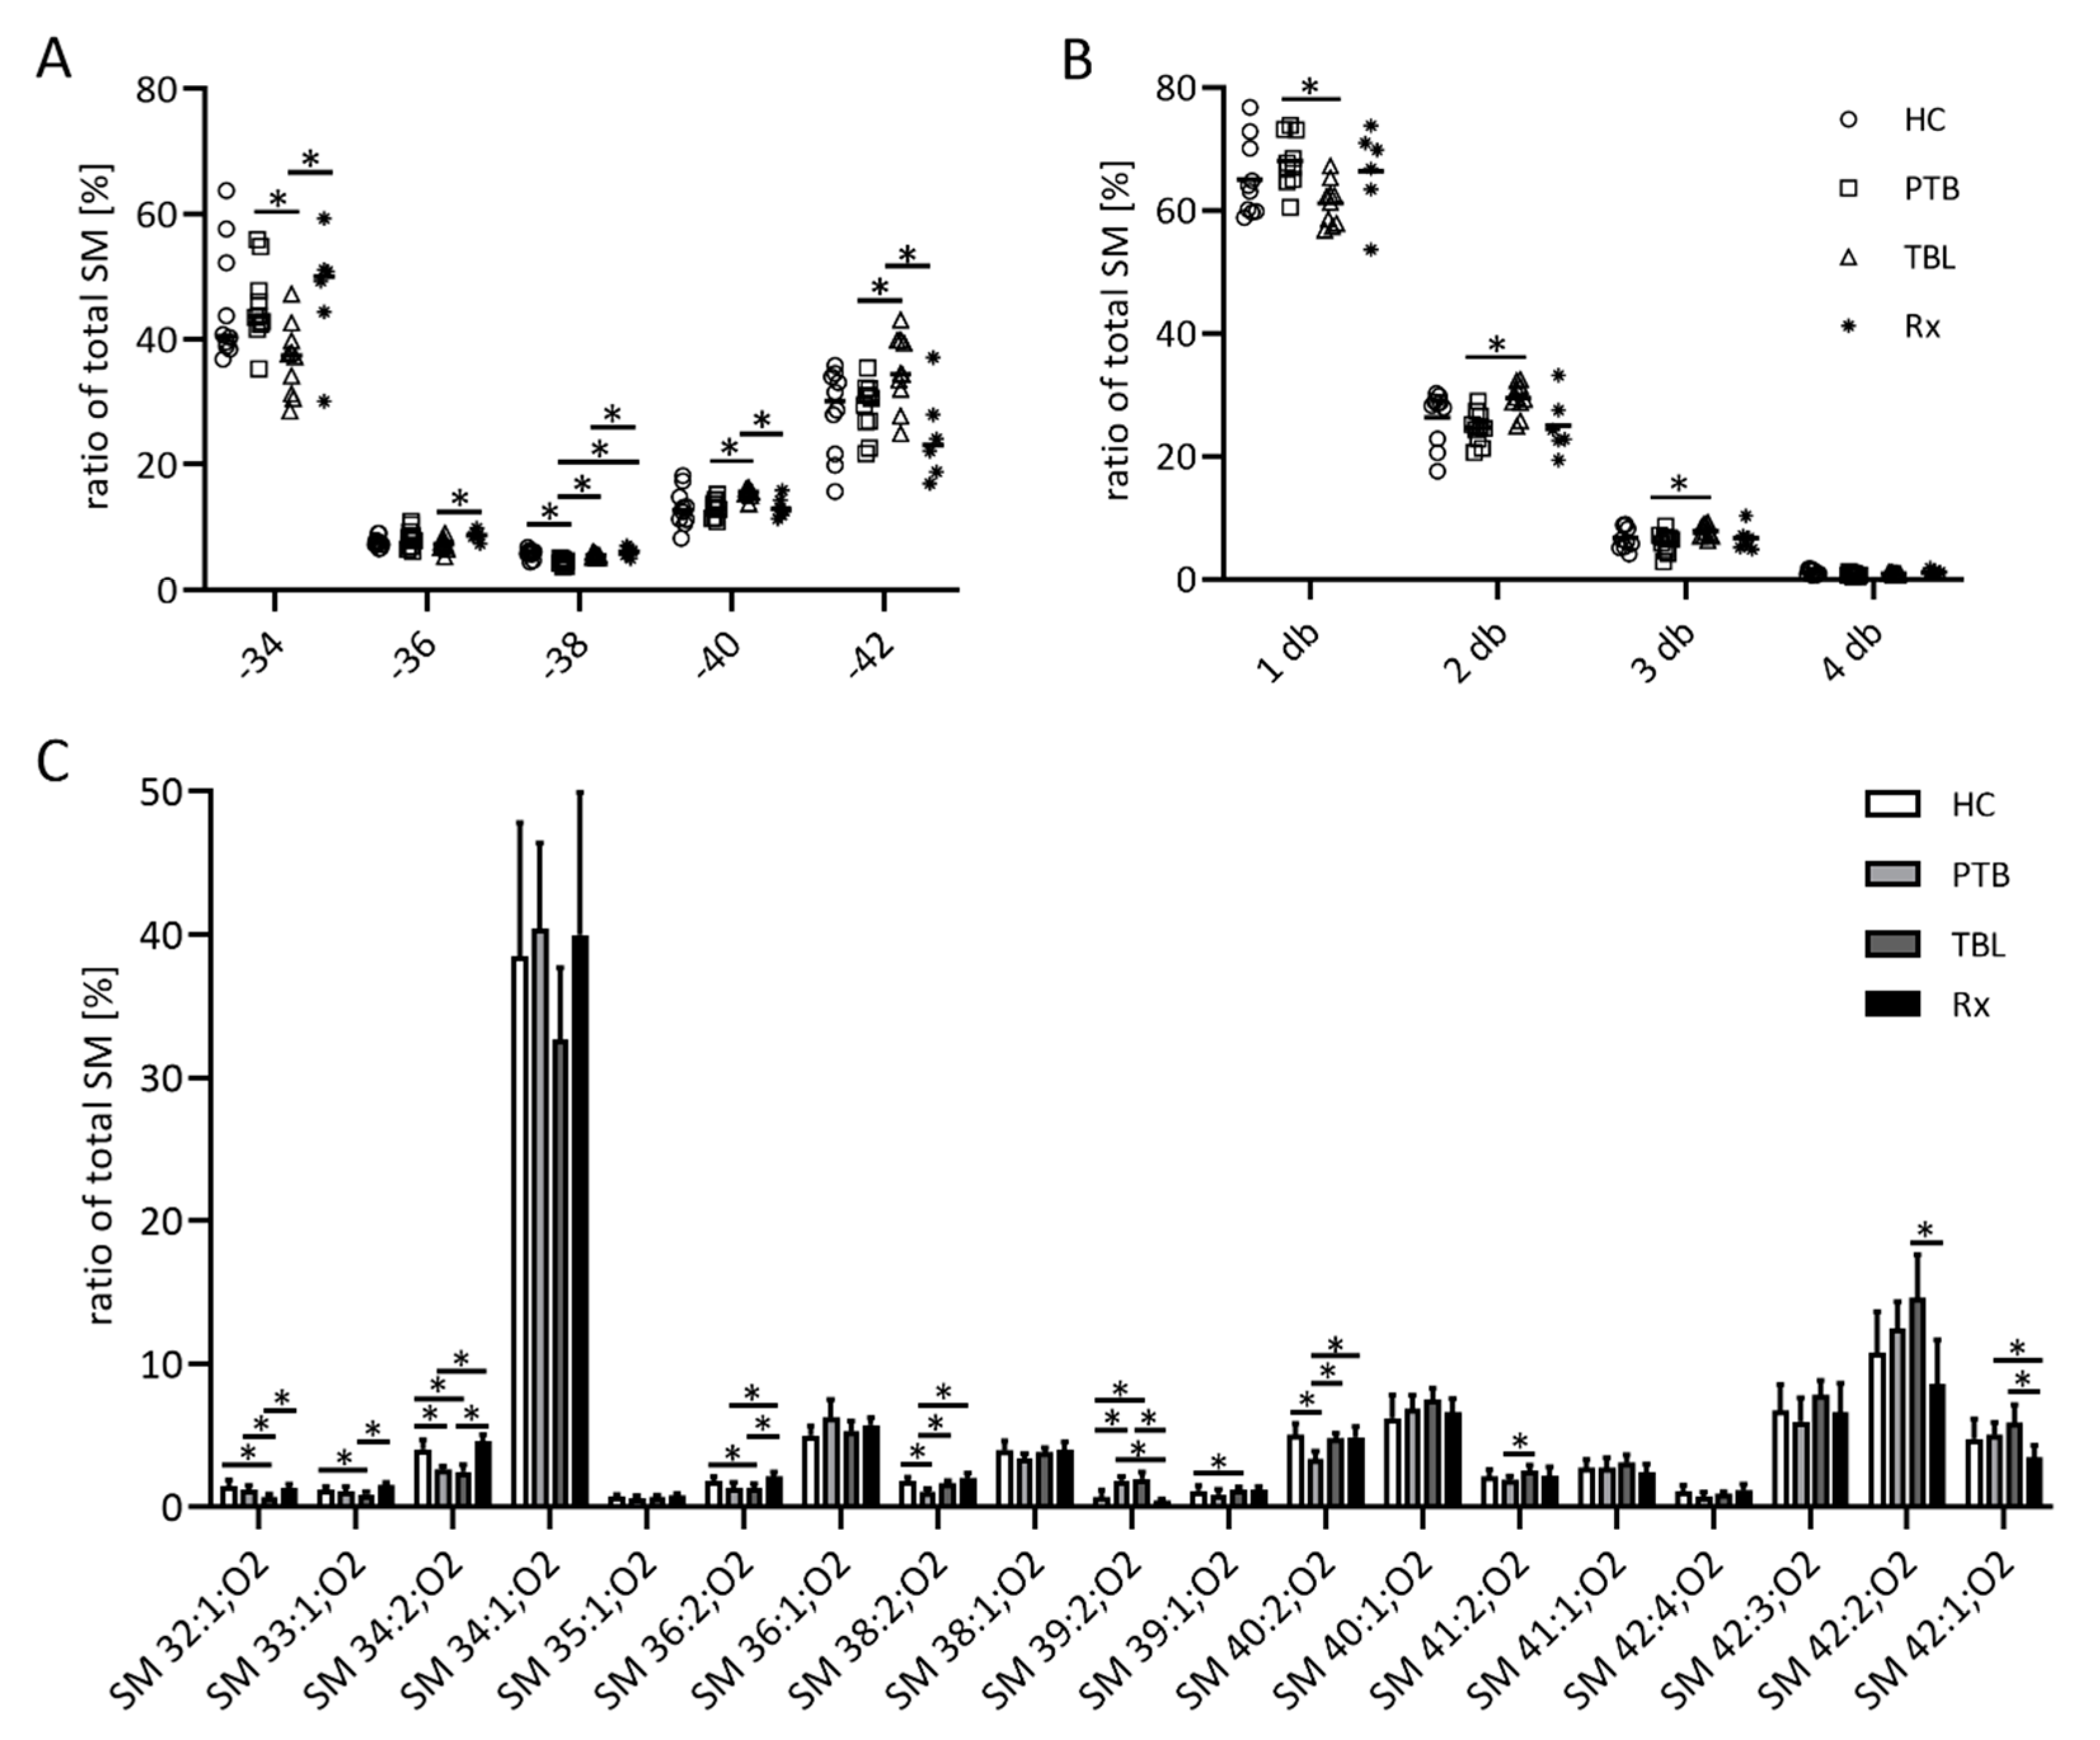 Biomedicines | Free Full-Text | Mycobacterium tuberculosis Affects Protein  and Lipid Content of Circulating Exosomes in Infected Patients Depending on  Tuberculosis Disease State | HTML